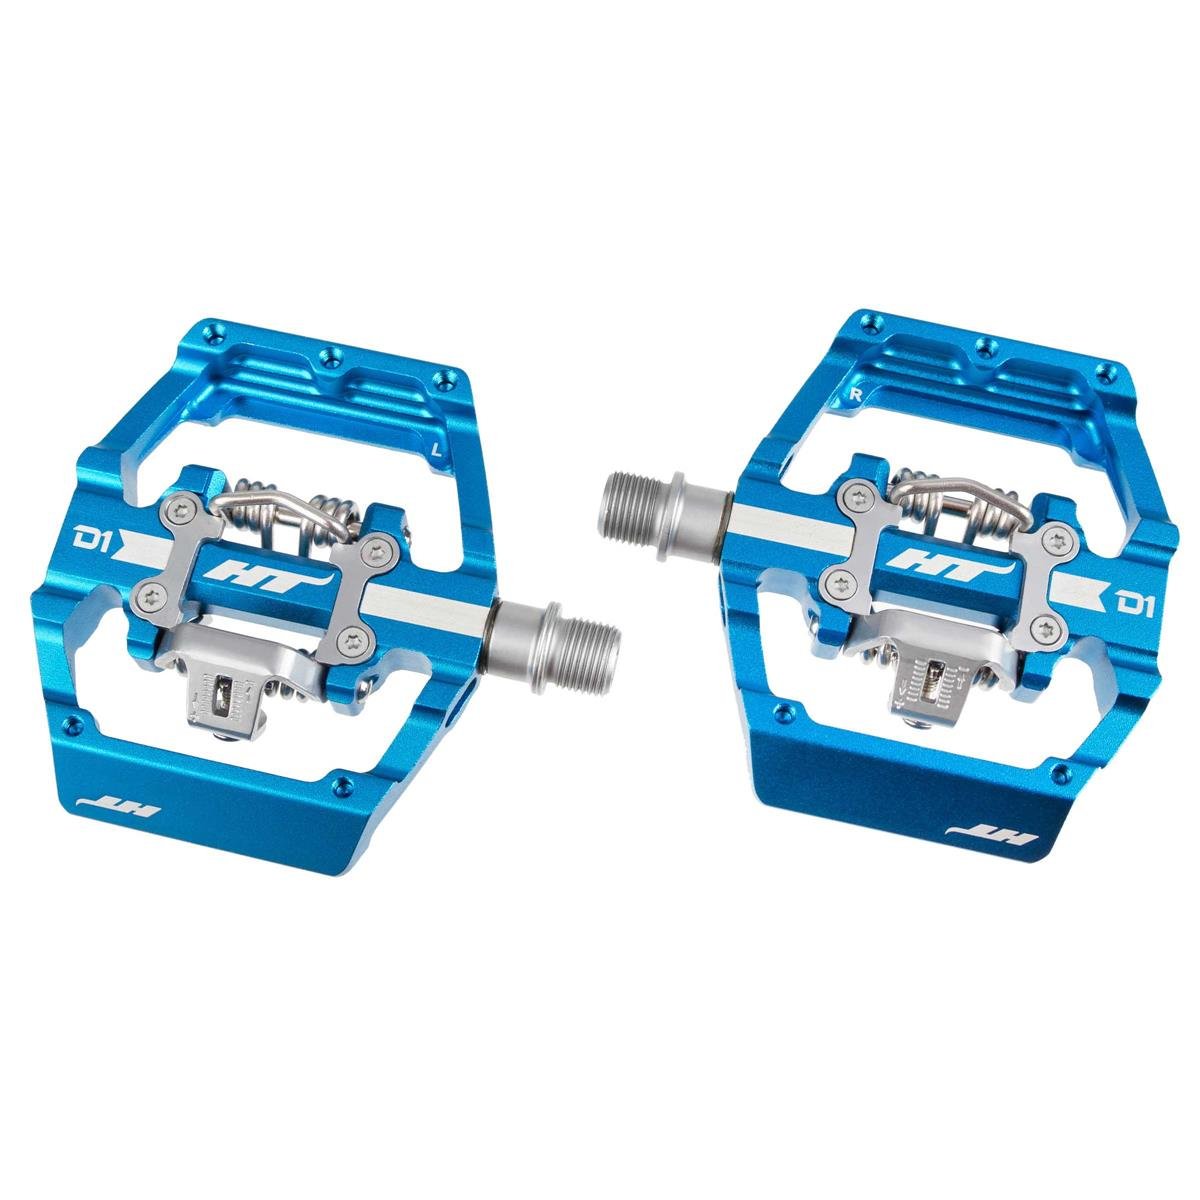 HT Components Clipless Pedals D1 Marine Blue